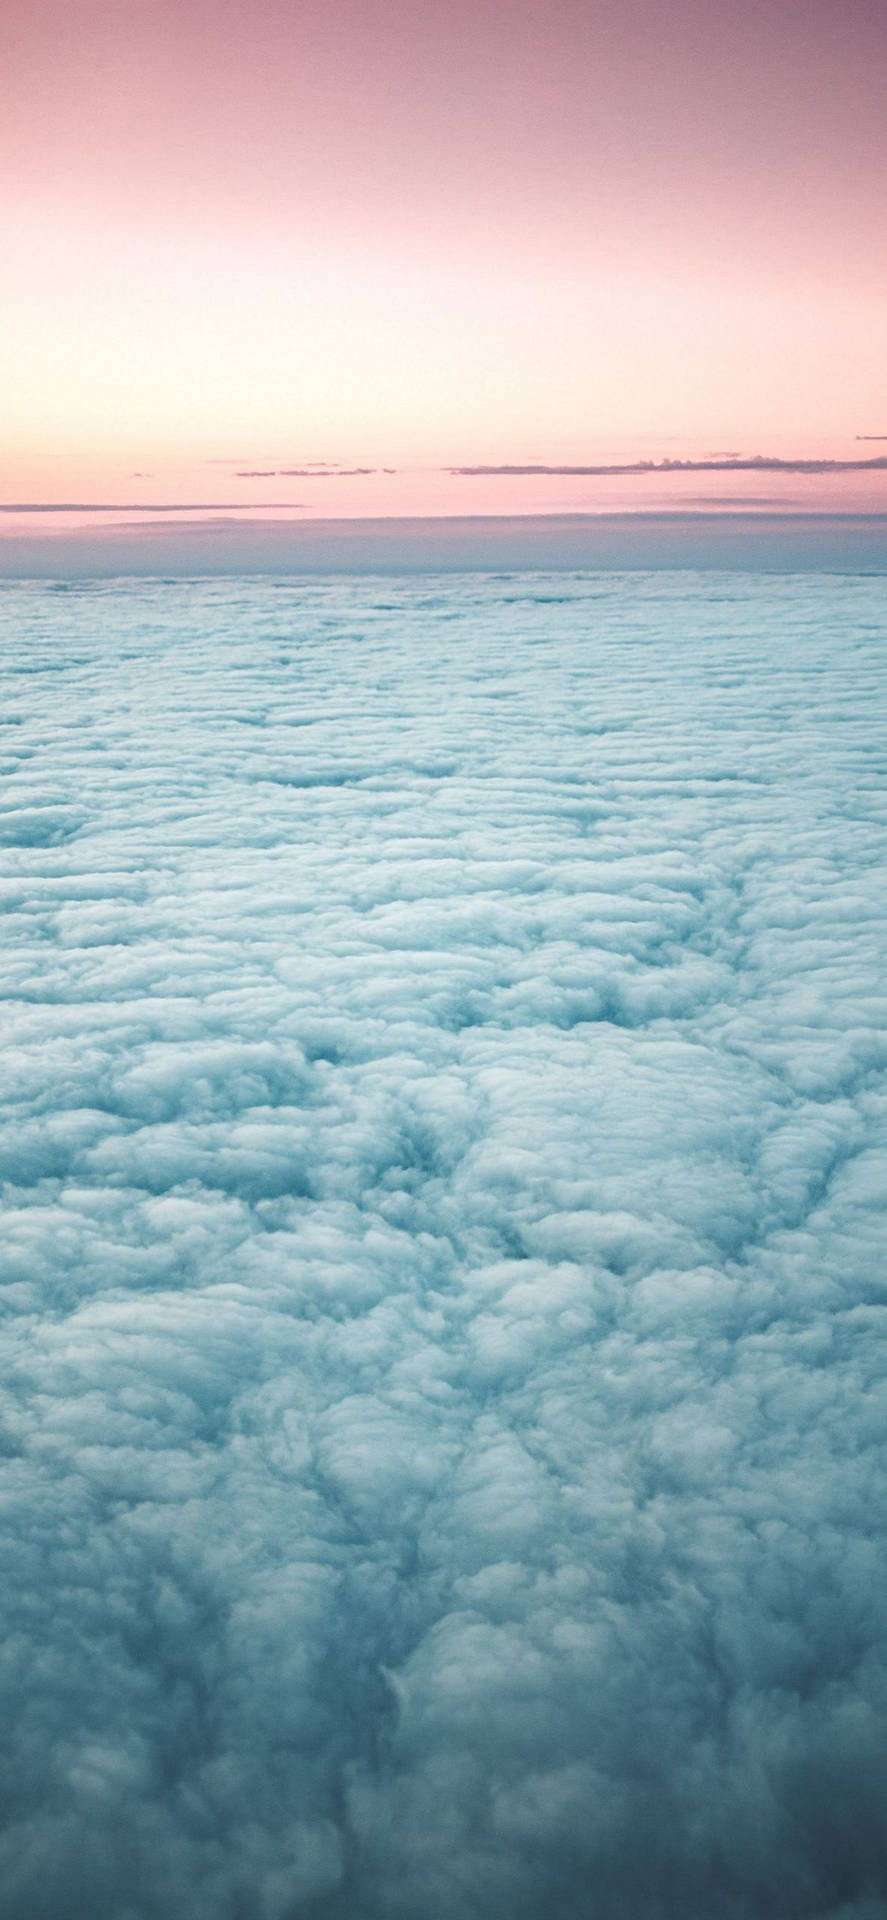 Sea Of Clouds Iphone Amoled Wallpaper